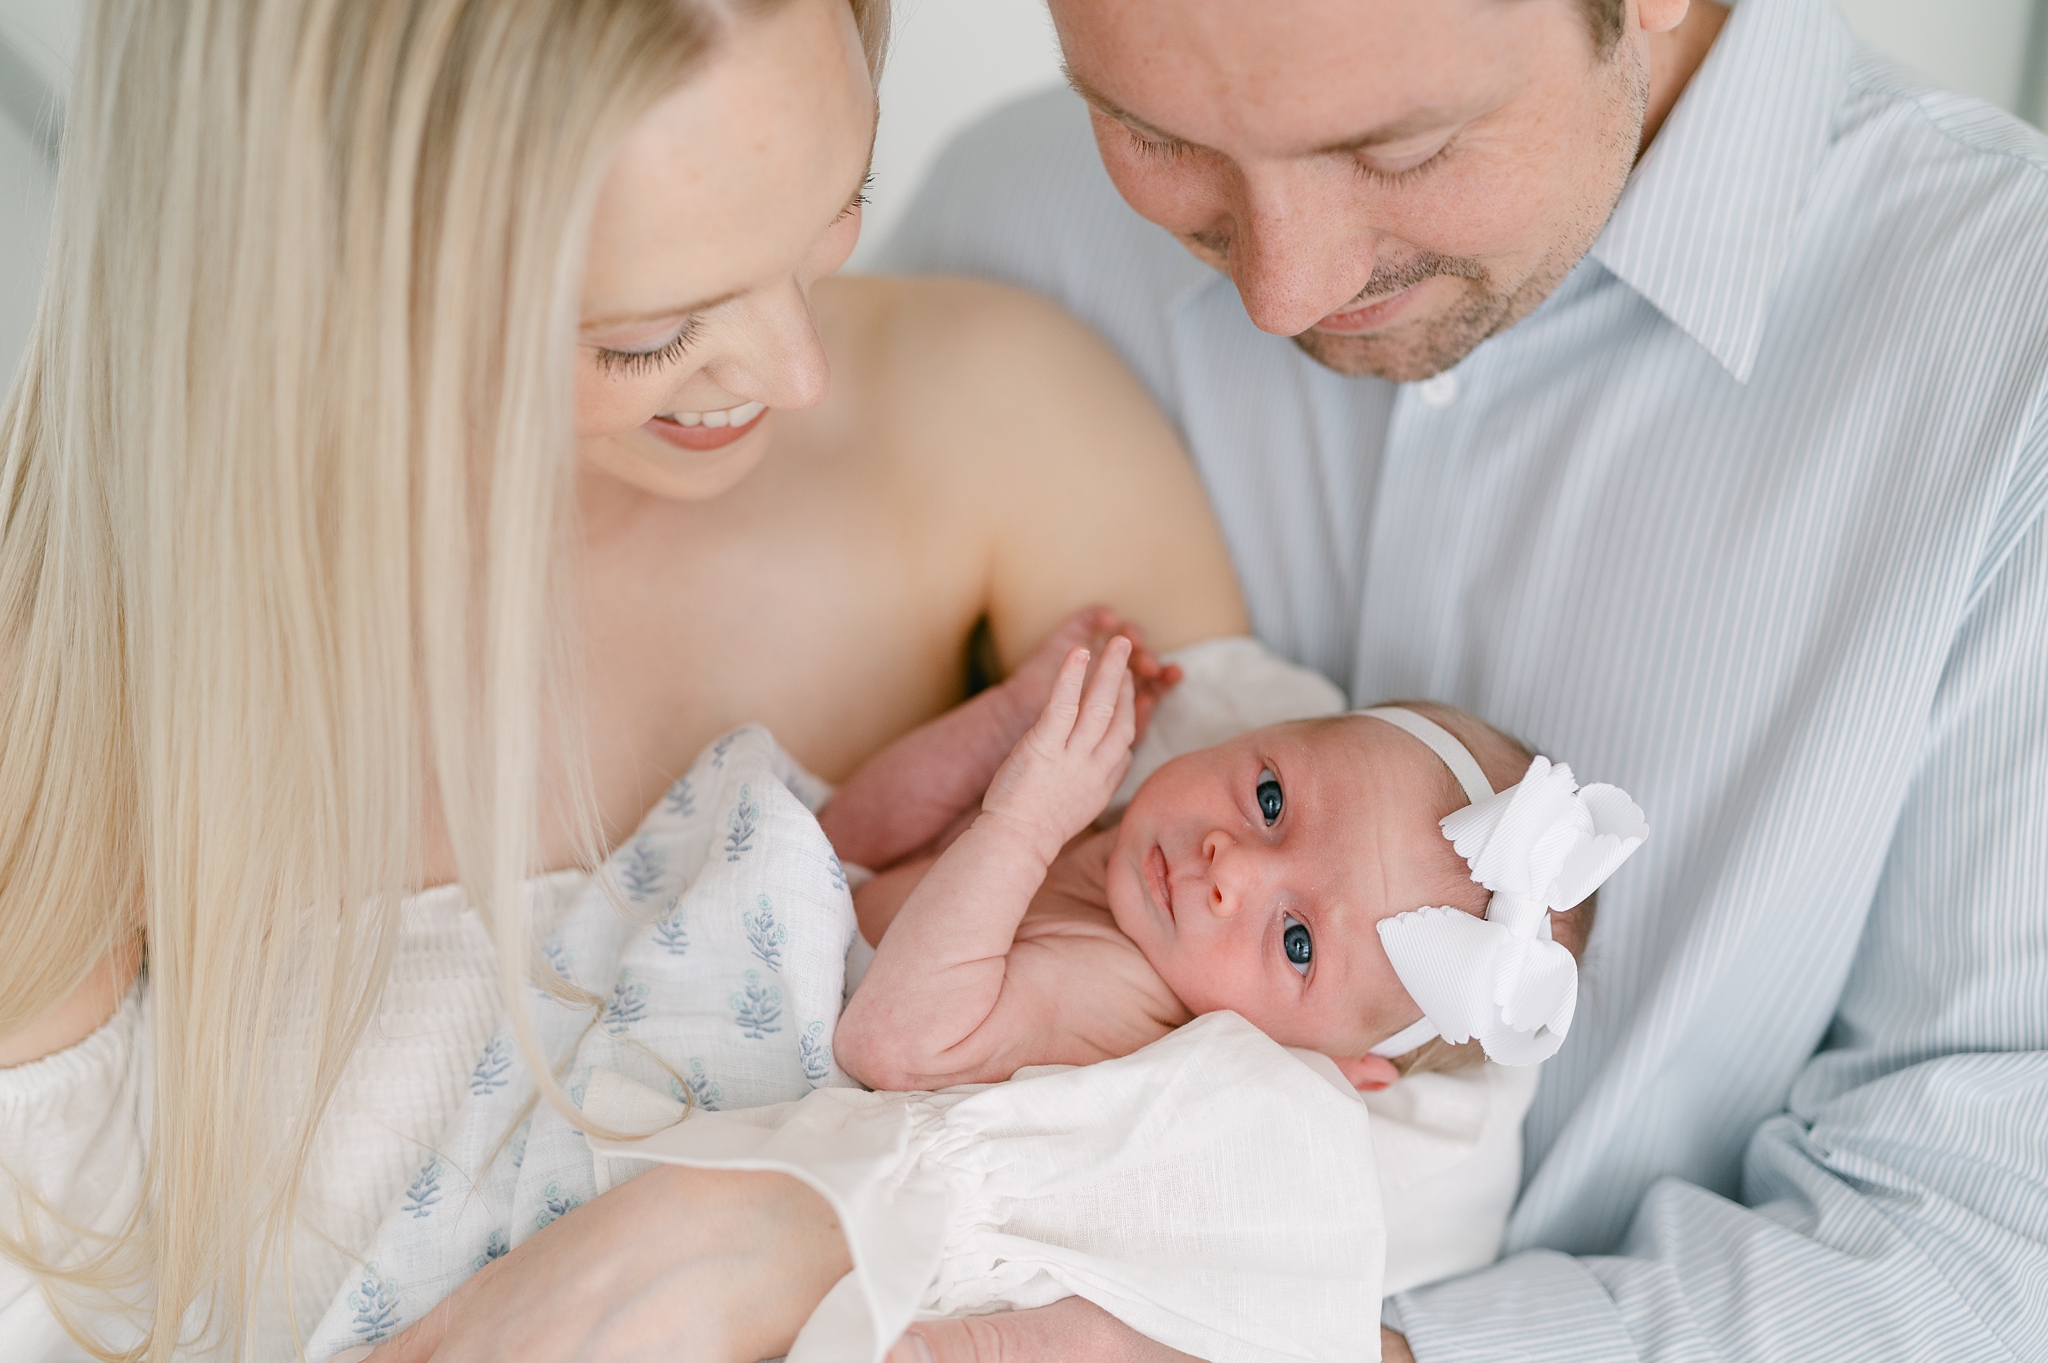 Mom and dad smile at their baby during a Whitefish Bay newborn session